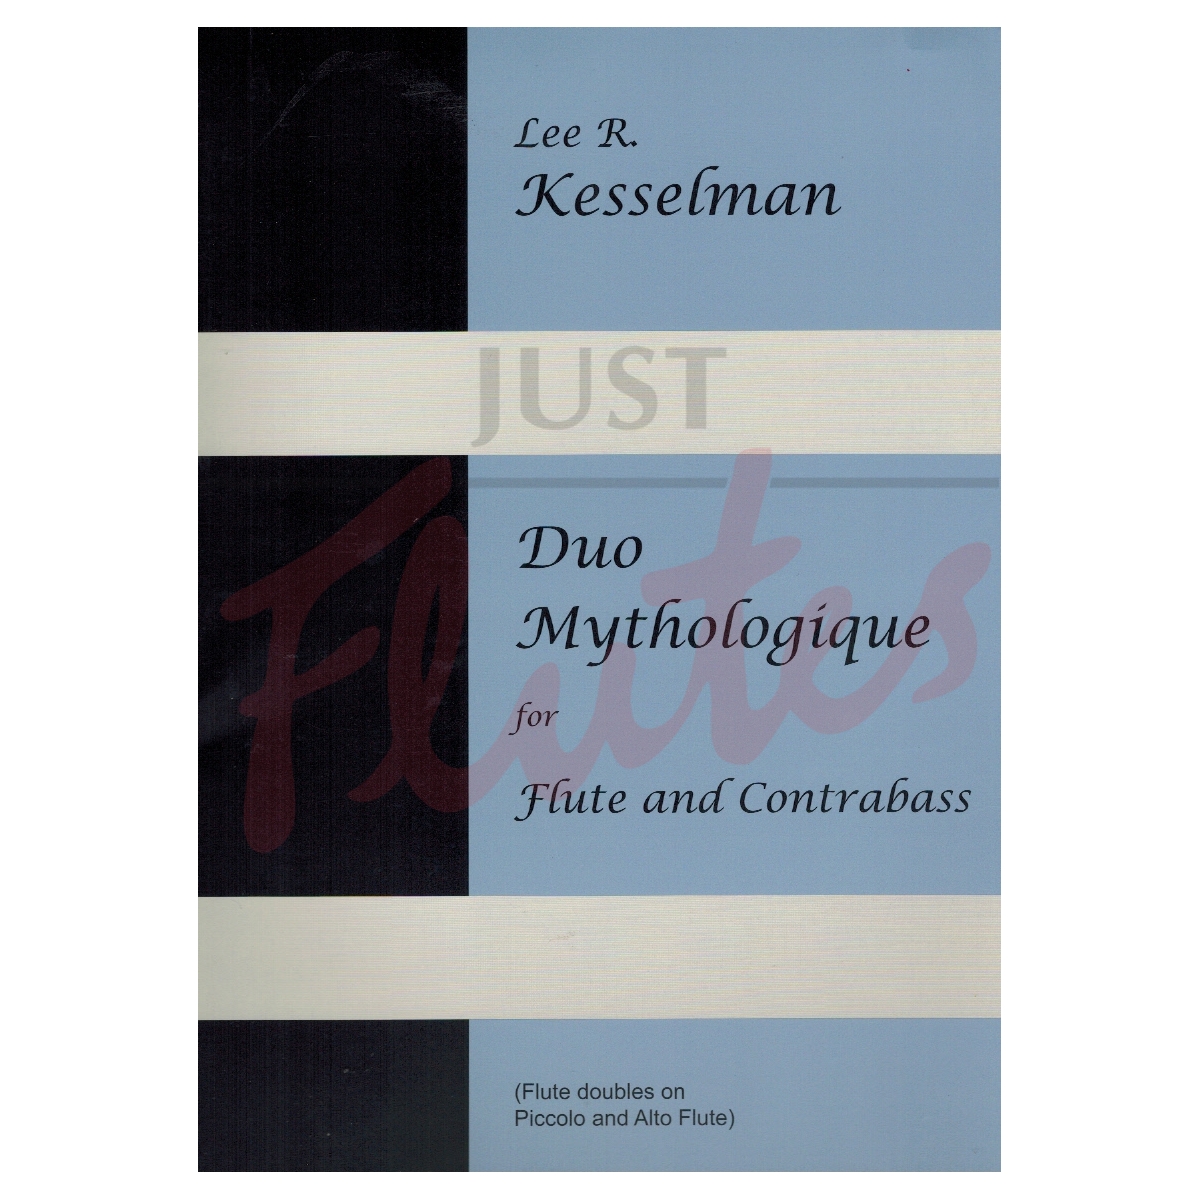 Duo Mythologique for Flute and Contrabass